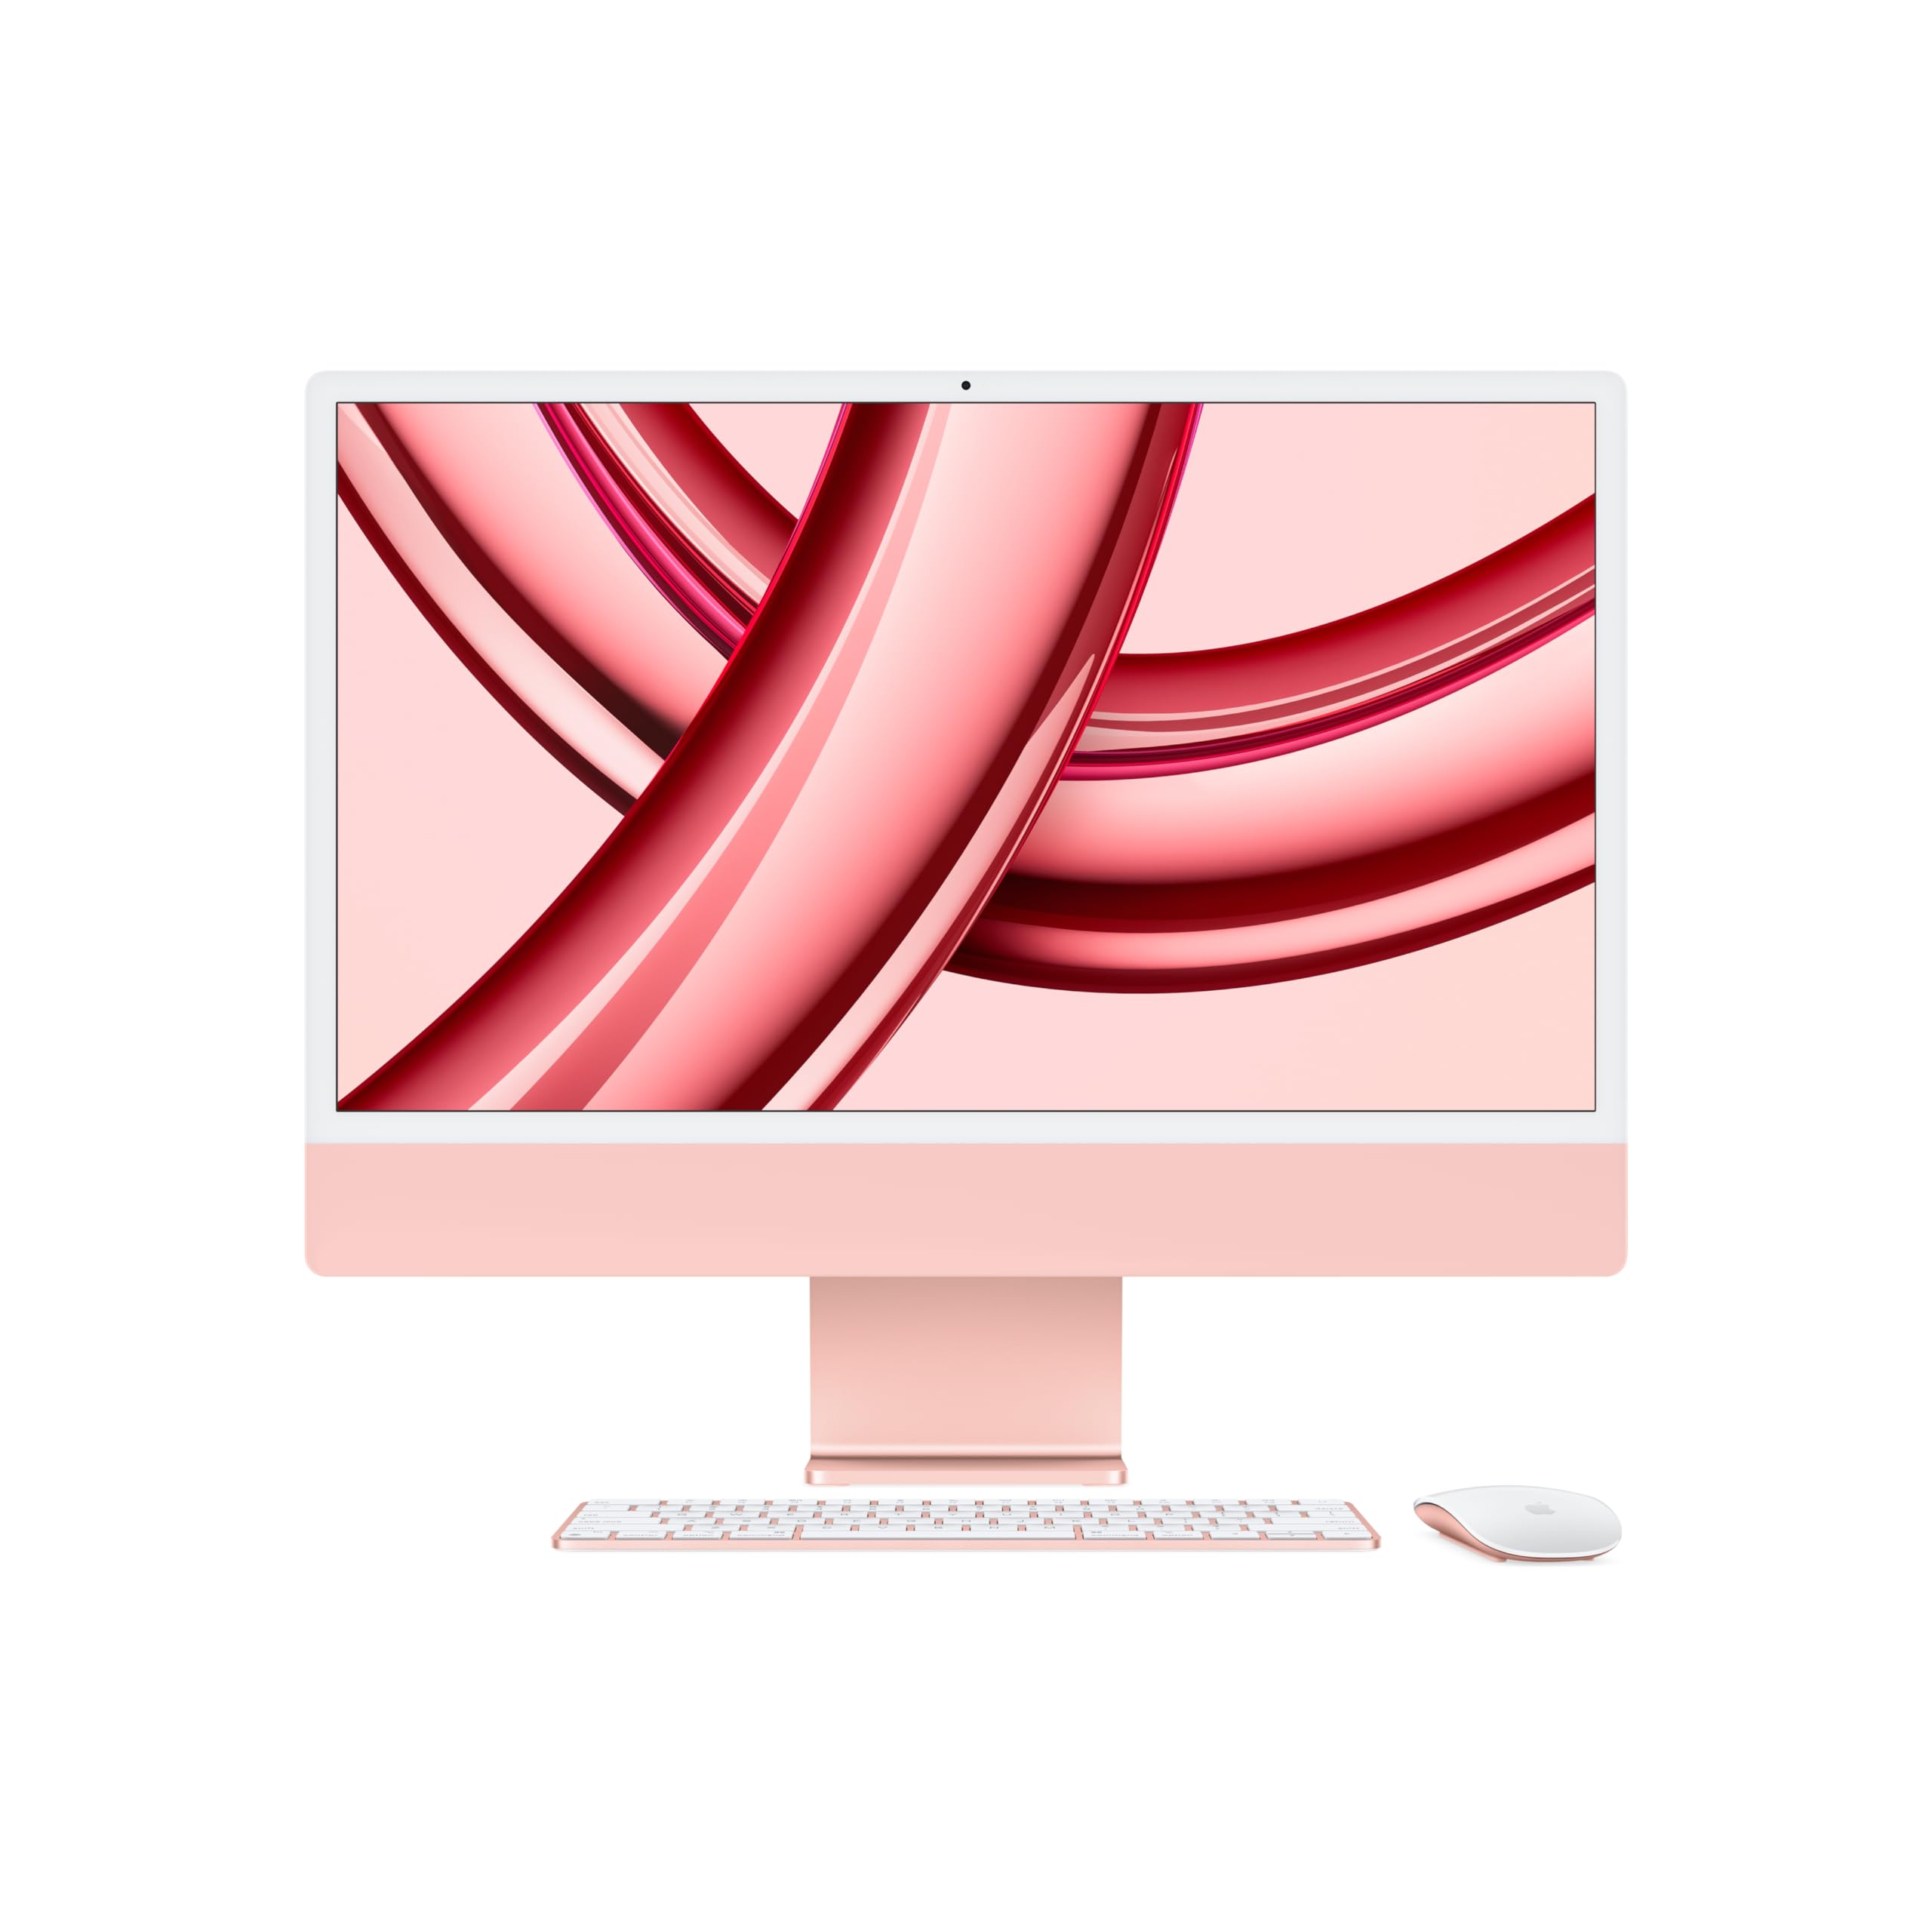 Apple 2023 iMac All-in-One Desktop Computer with M3 chip: 8-core CPU, 8-core GPU, 24-inch Retina Display, 8GB Unified Memory, 256GB SSD Storage, Matching Accessories. Works with iPhone/iPad; Pink